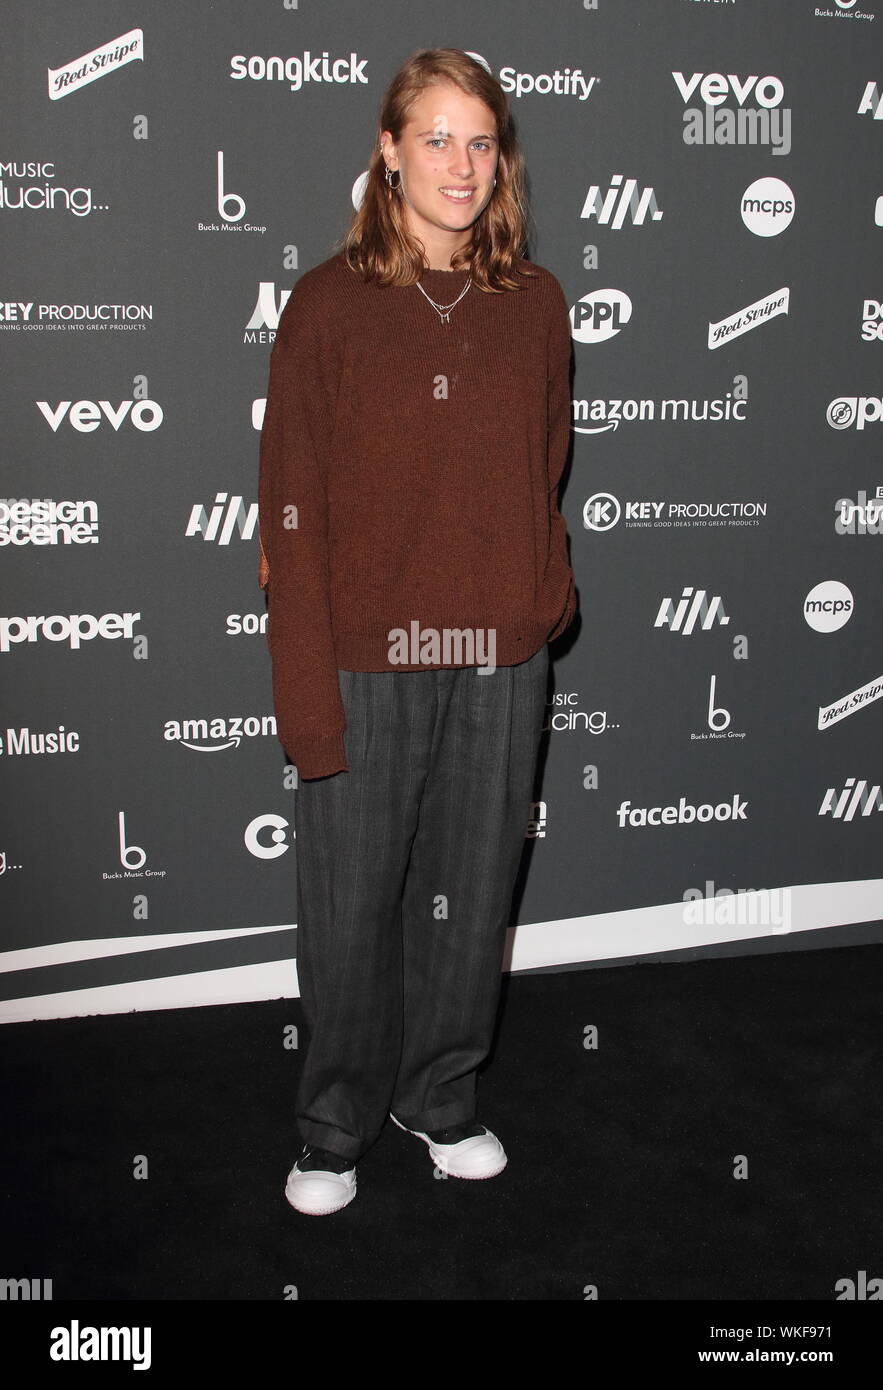 Singer, Songwriter Marika Hackman on the red carpet arrivals board during the AIM Independent Music Awards 2019 held at the Roundhouse in London. Stock Photo